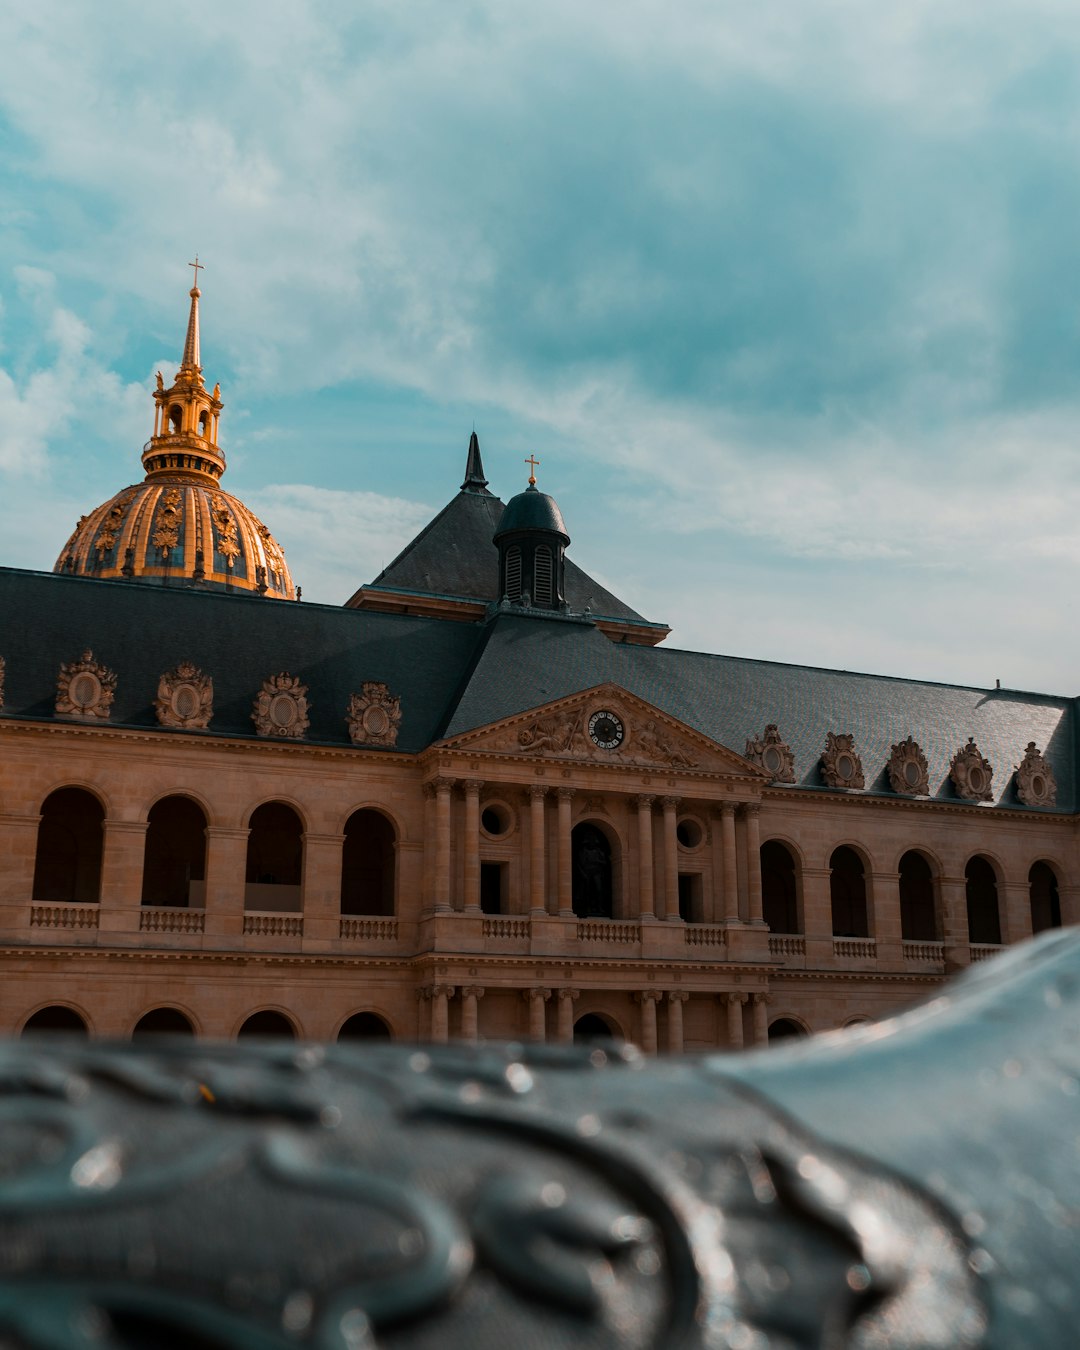 Travel Tips and Stories of Invalides in France